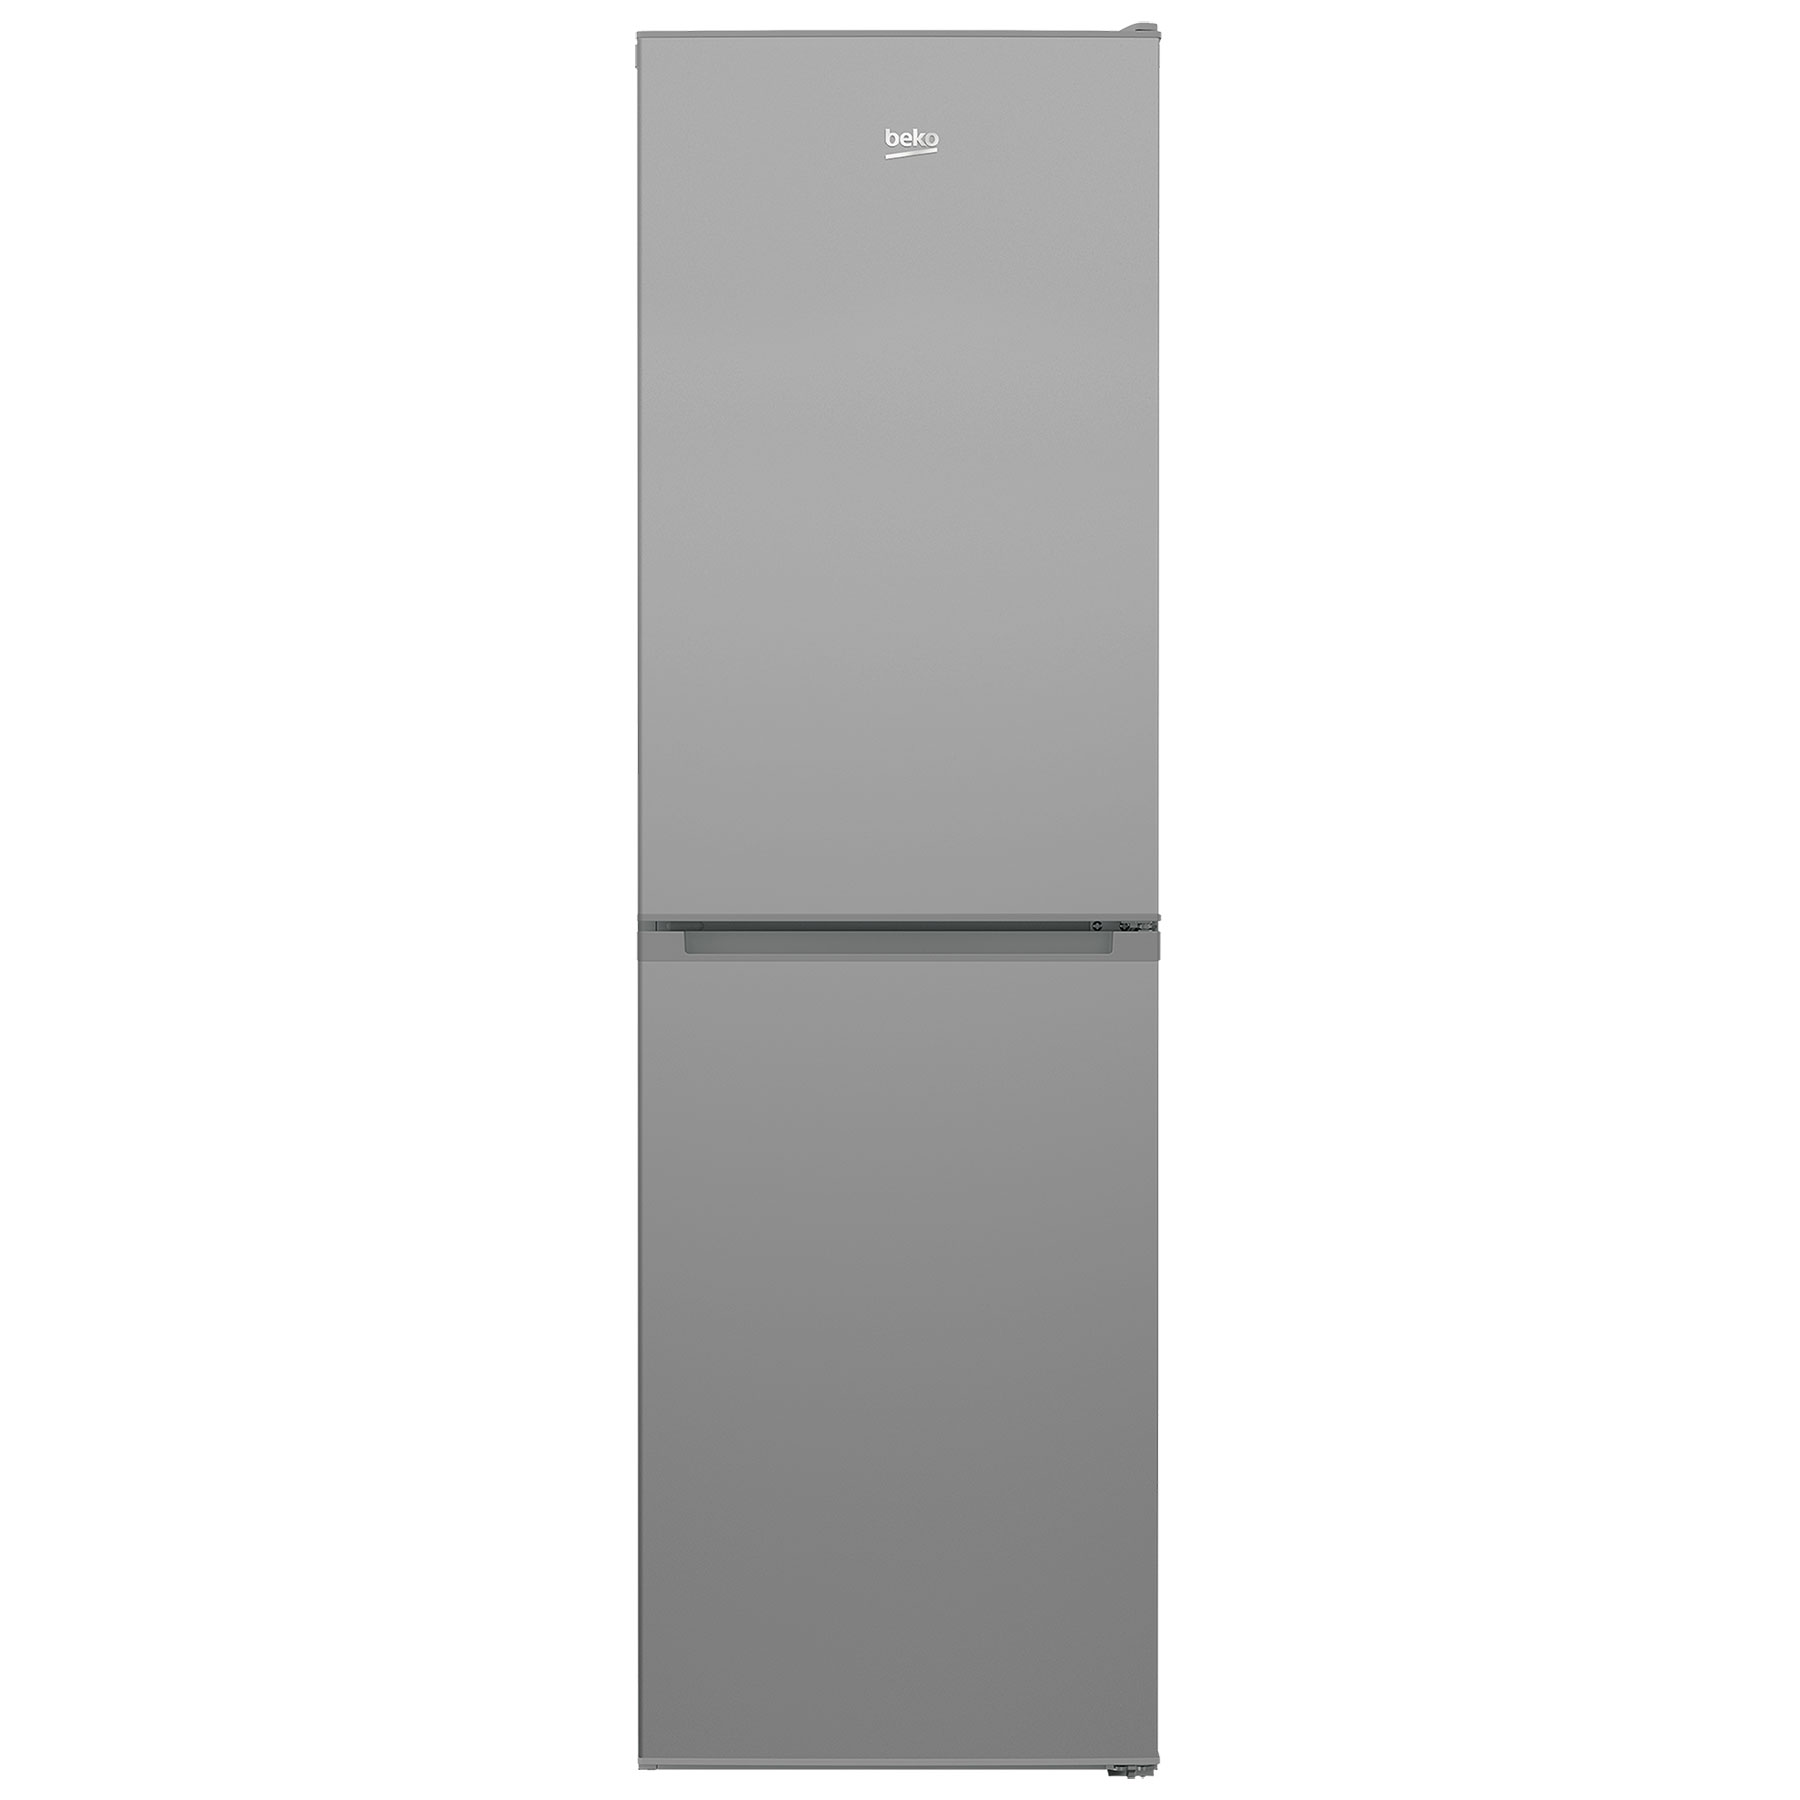 Image of Beko CCFM4582S 54cm Frost Free Fridge Freezer in Silver 1 82m E Rated